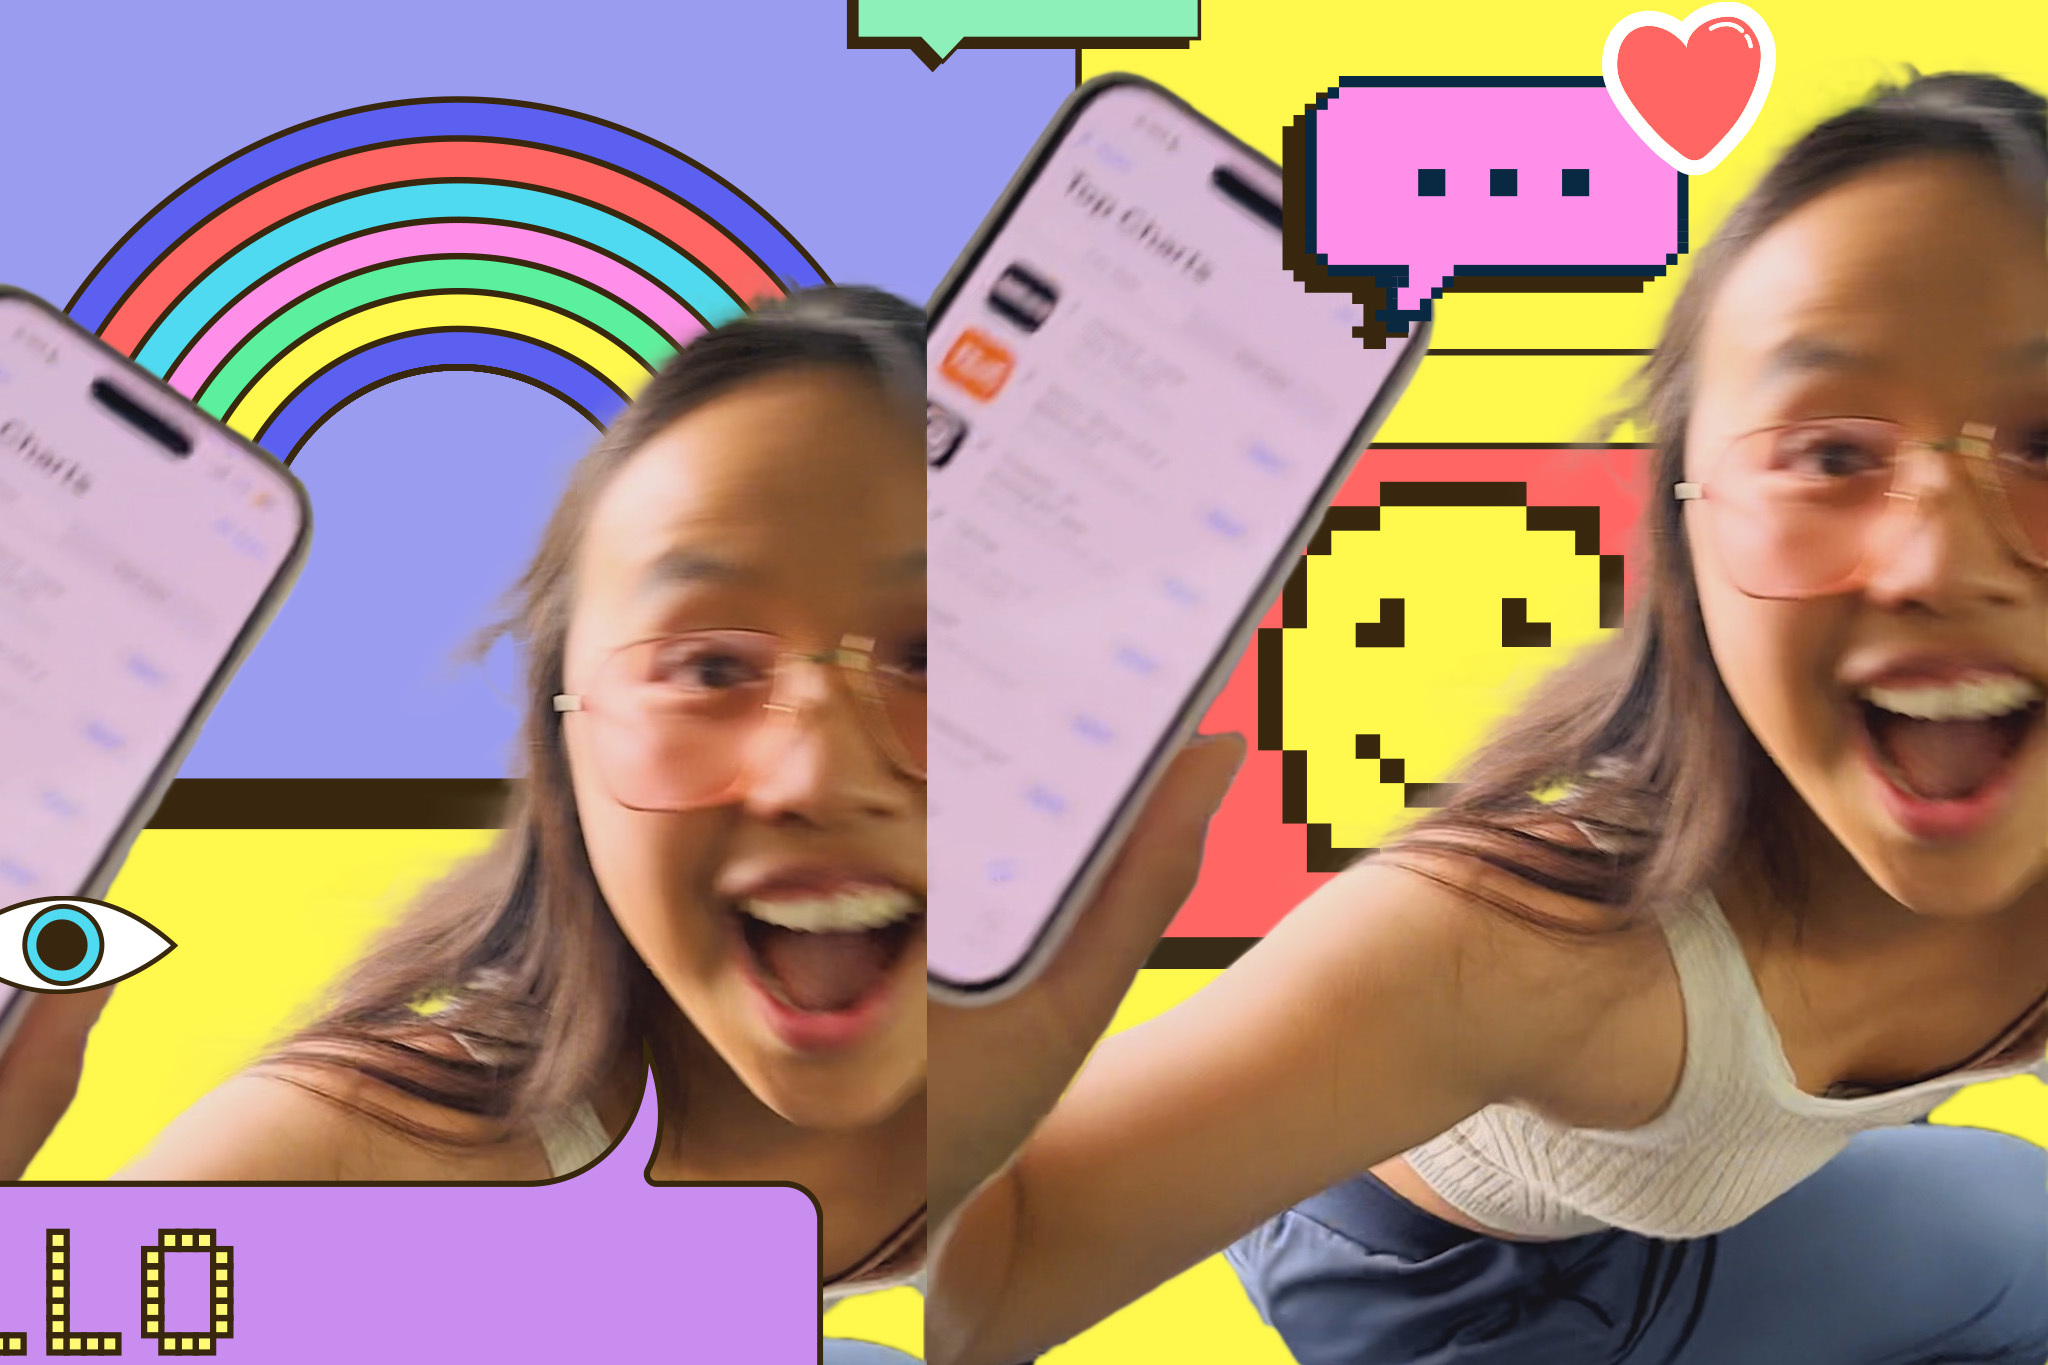 A smiling individual with glasses excitedly shows a phone while vibrant graphics in the background include a rainbow, pixel art, speech bubbles, and the word "HELLO."